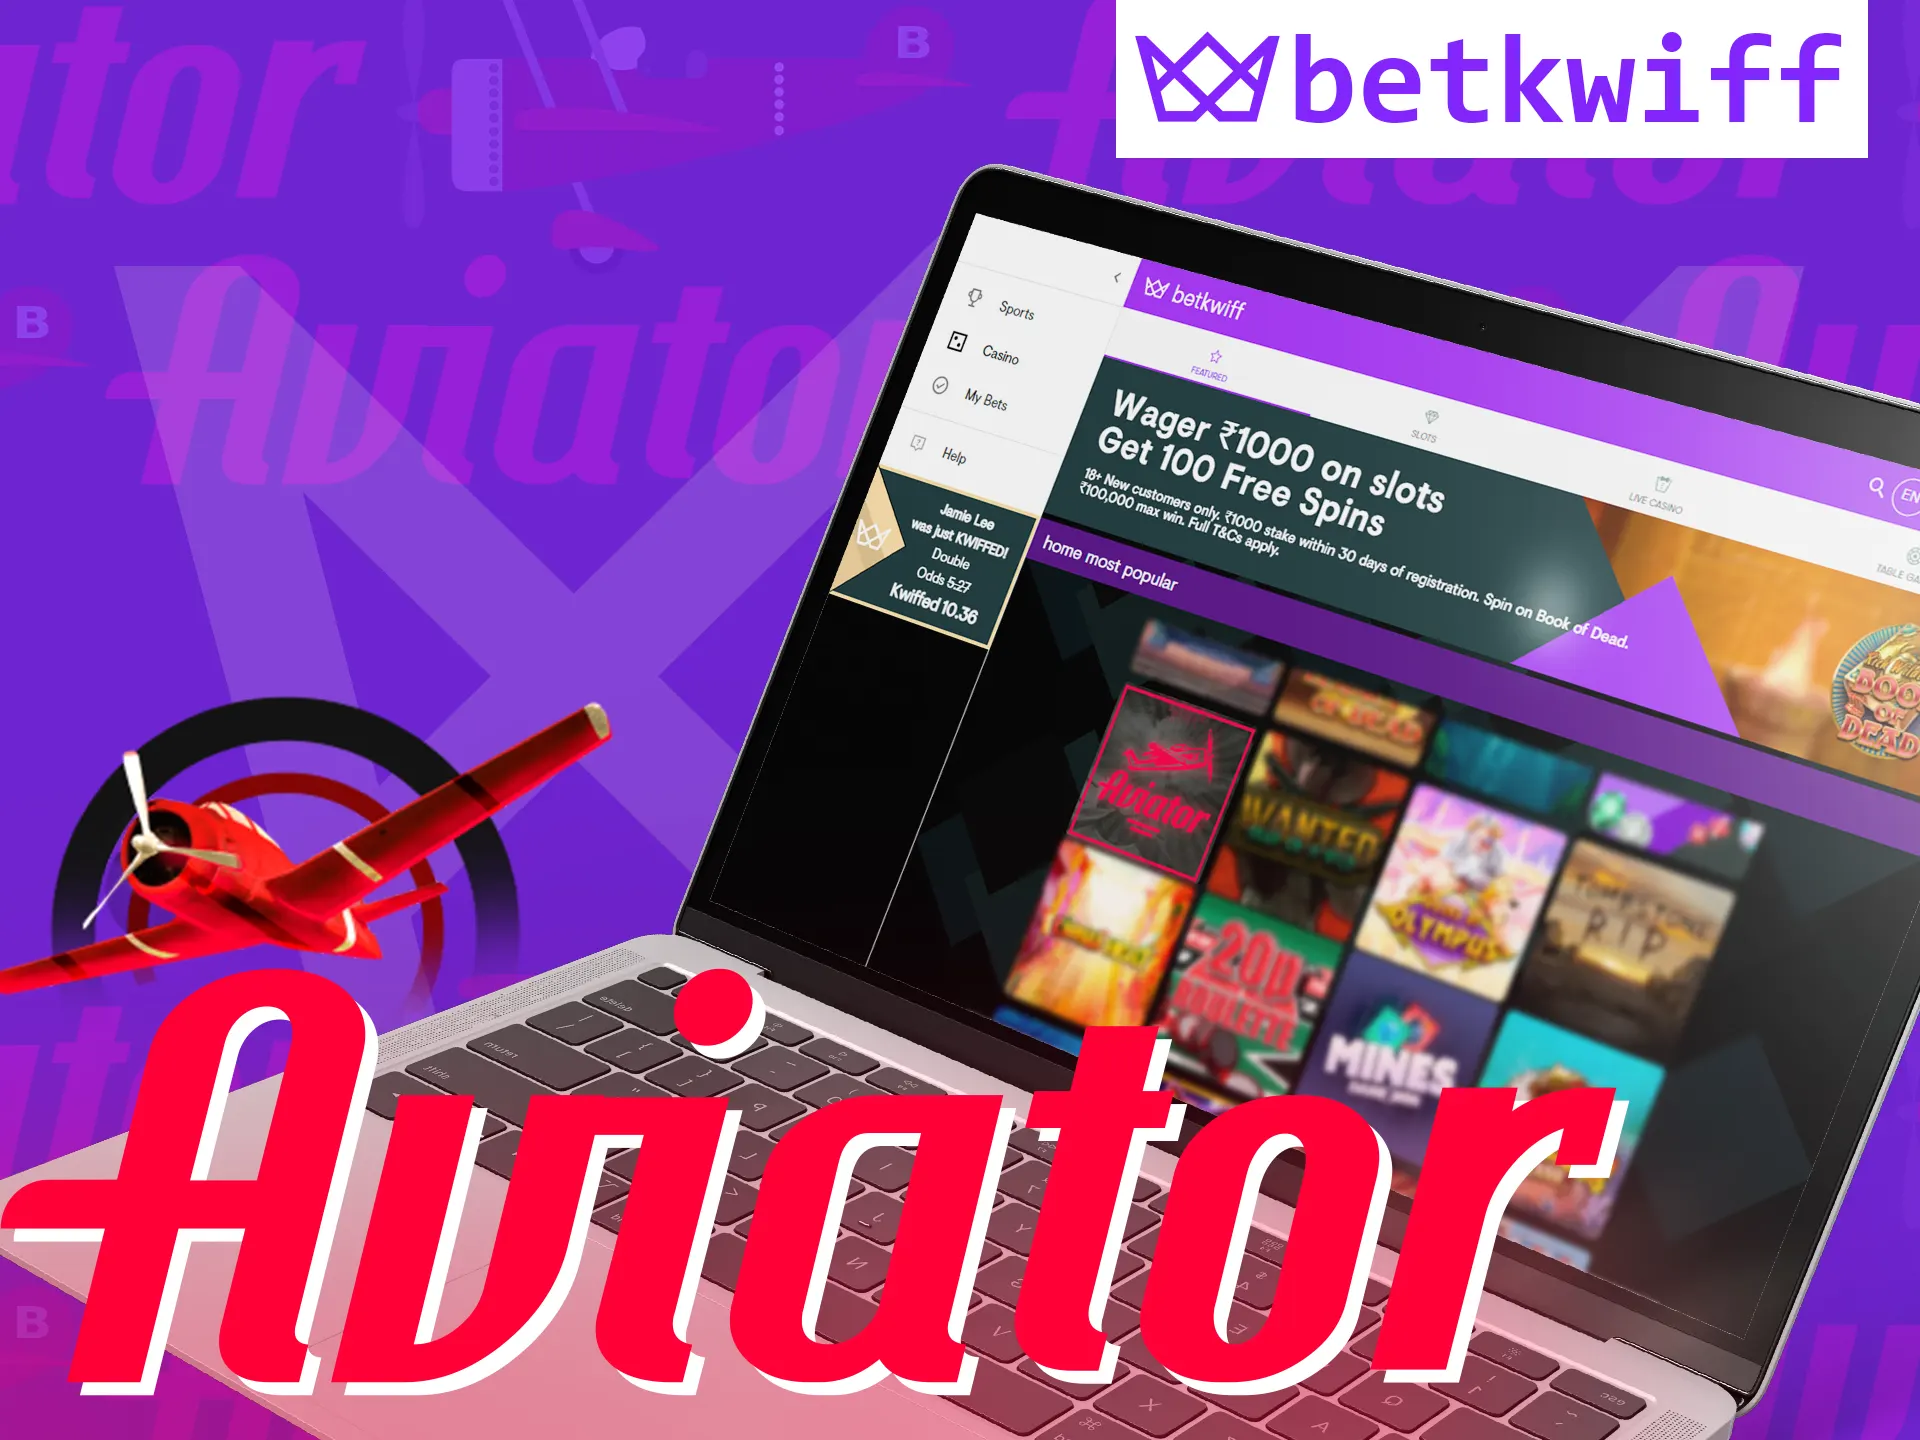 At Betkwiff you can play Aviator.